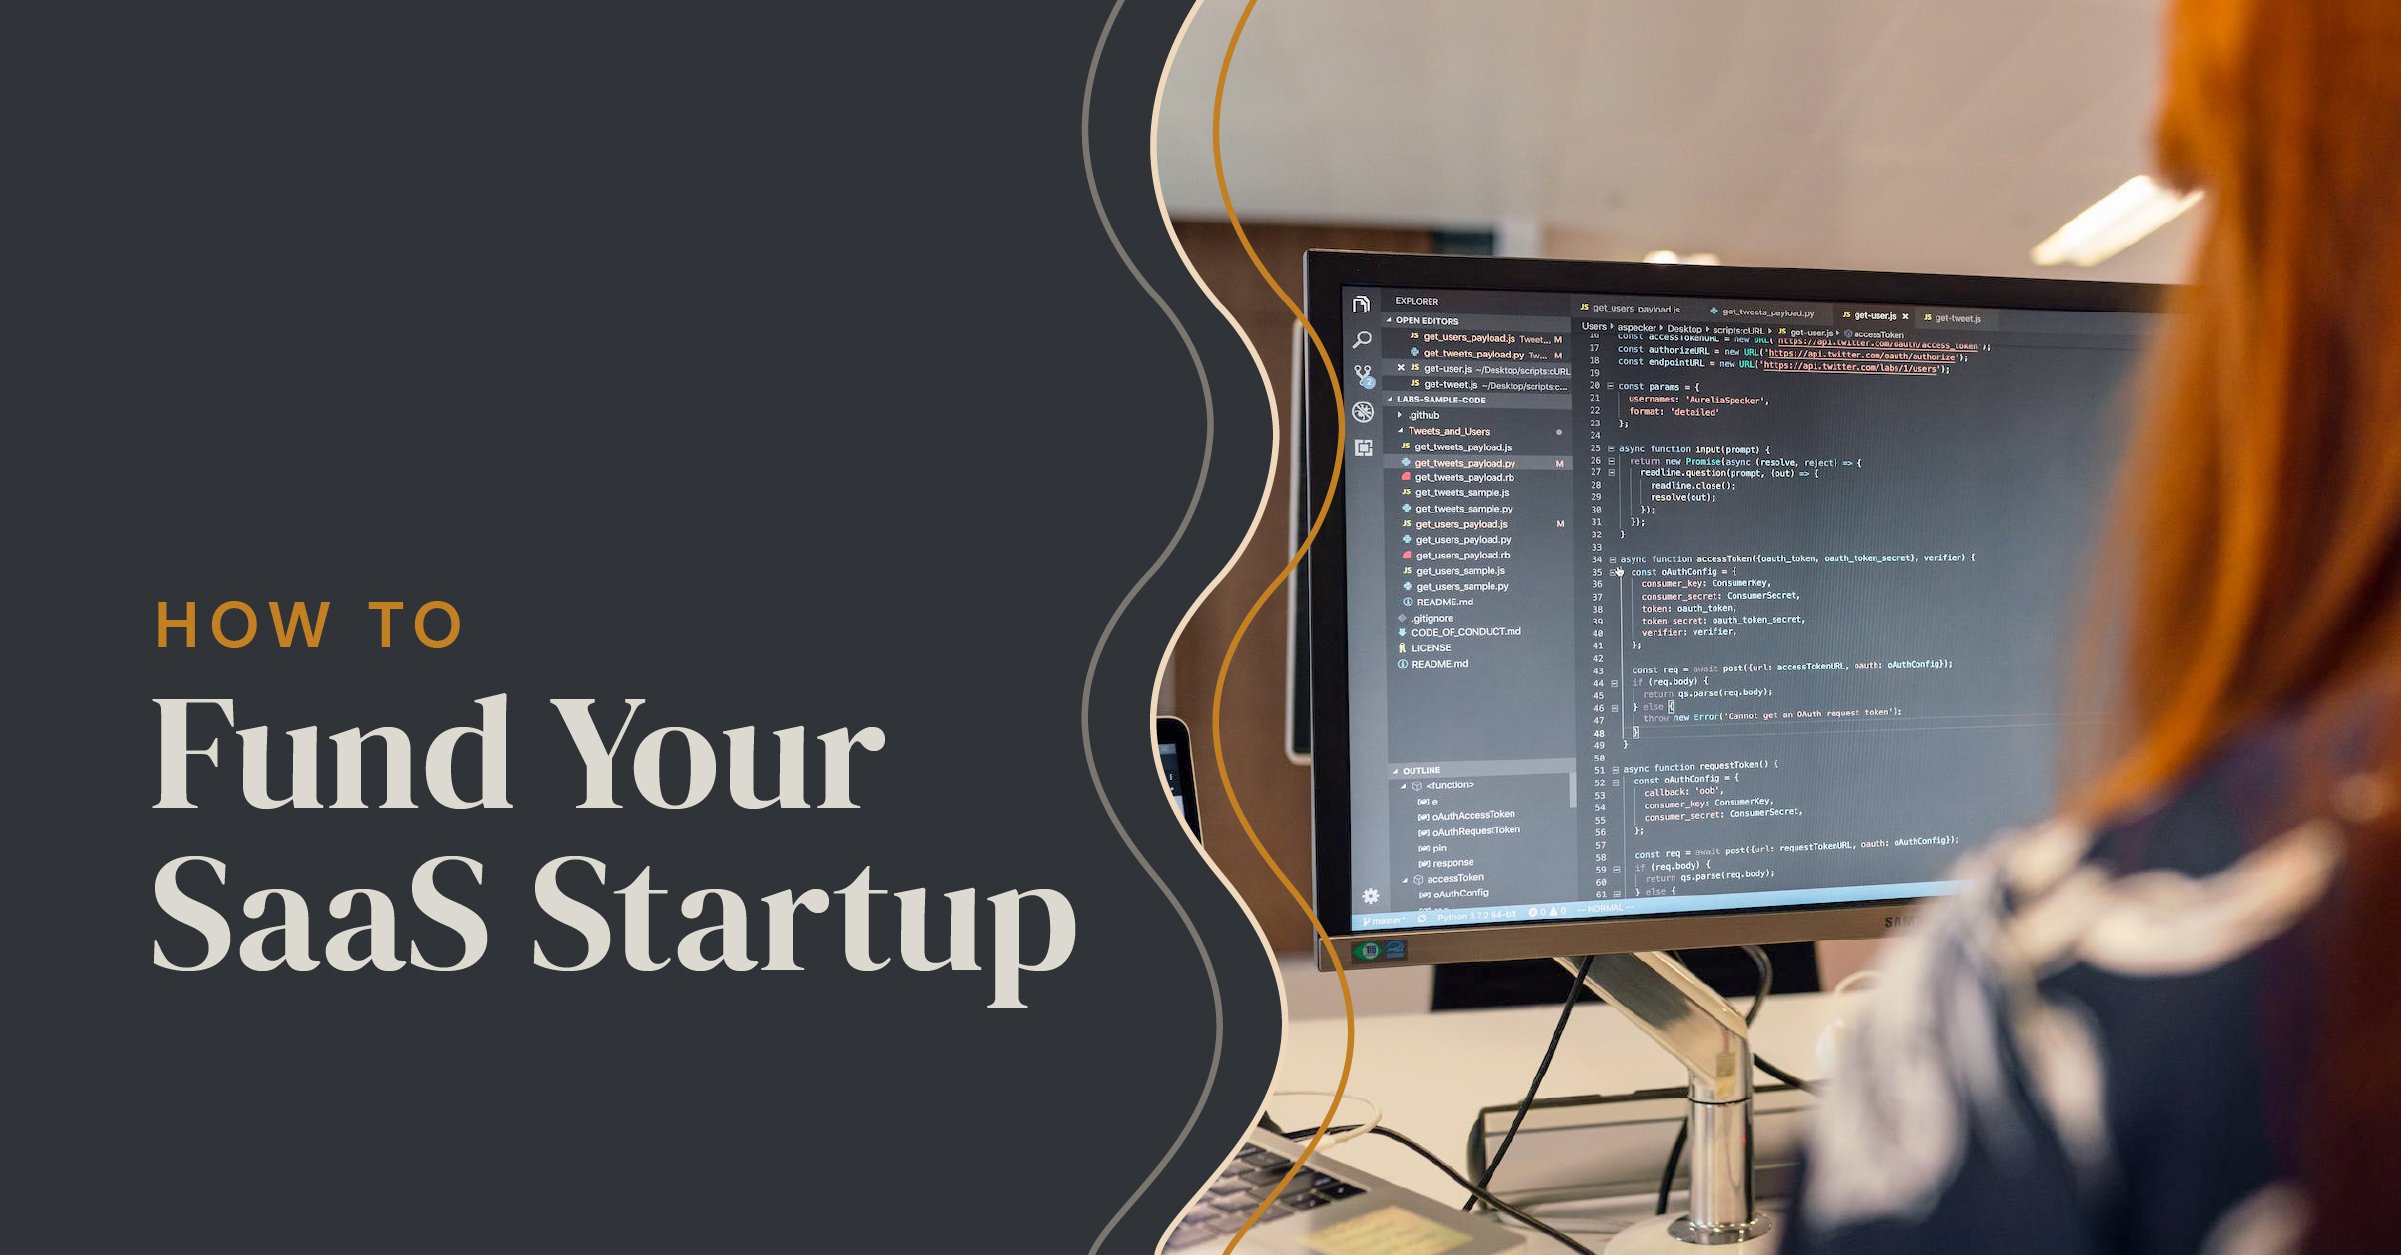 Fund your SaaS startup